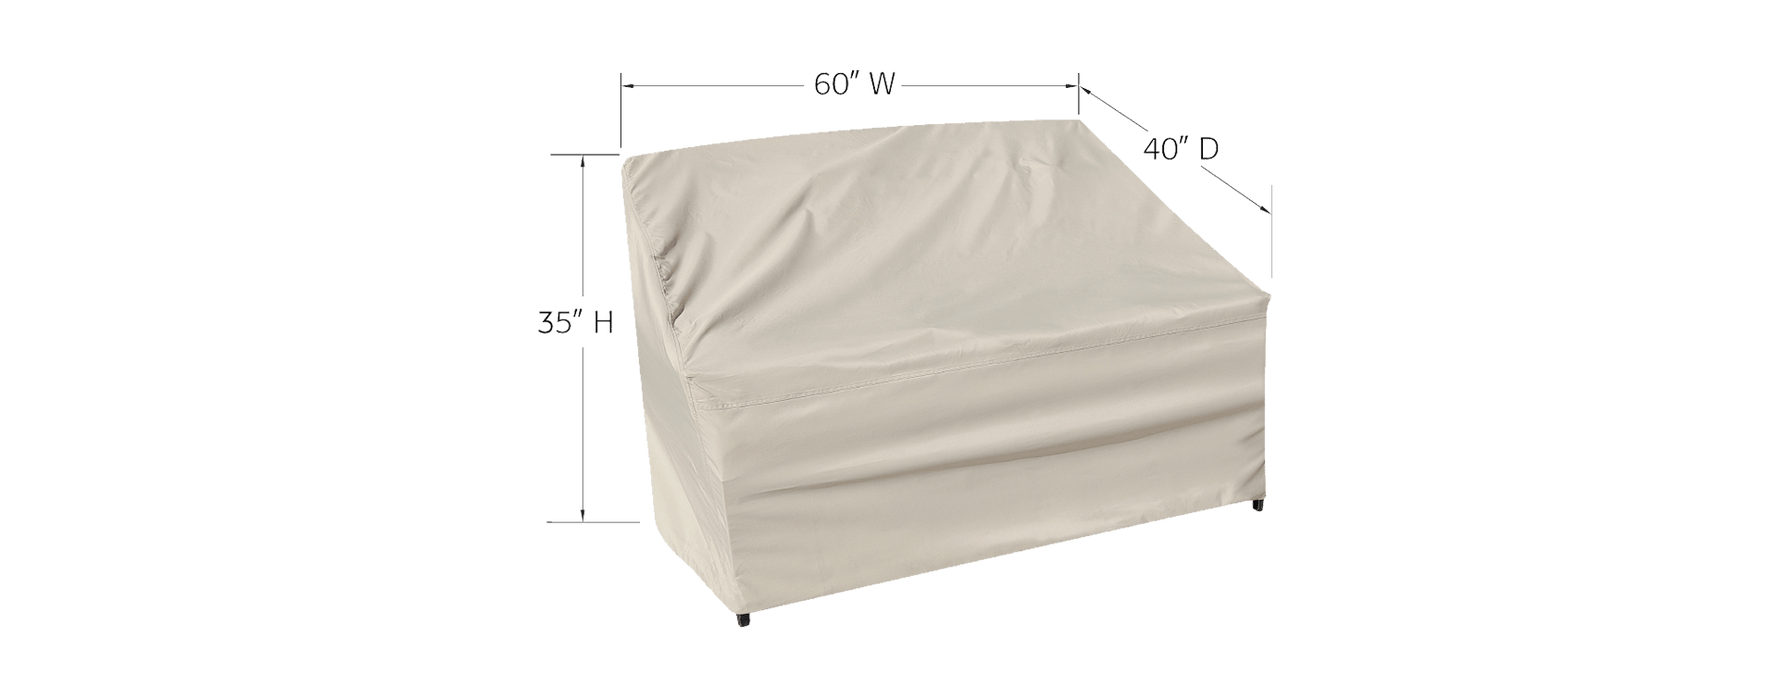 Large Loveseat Cover